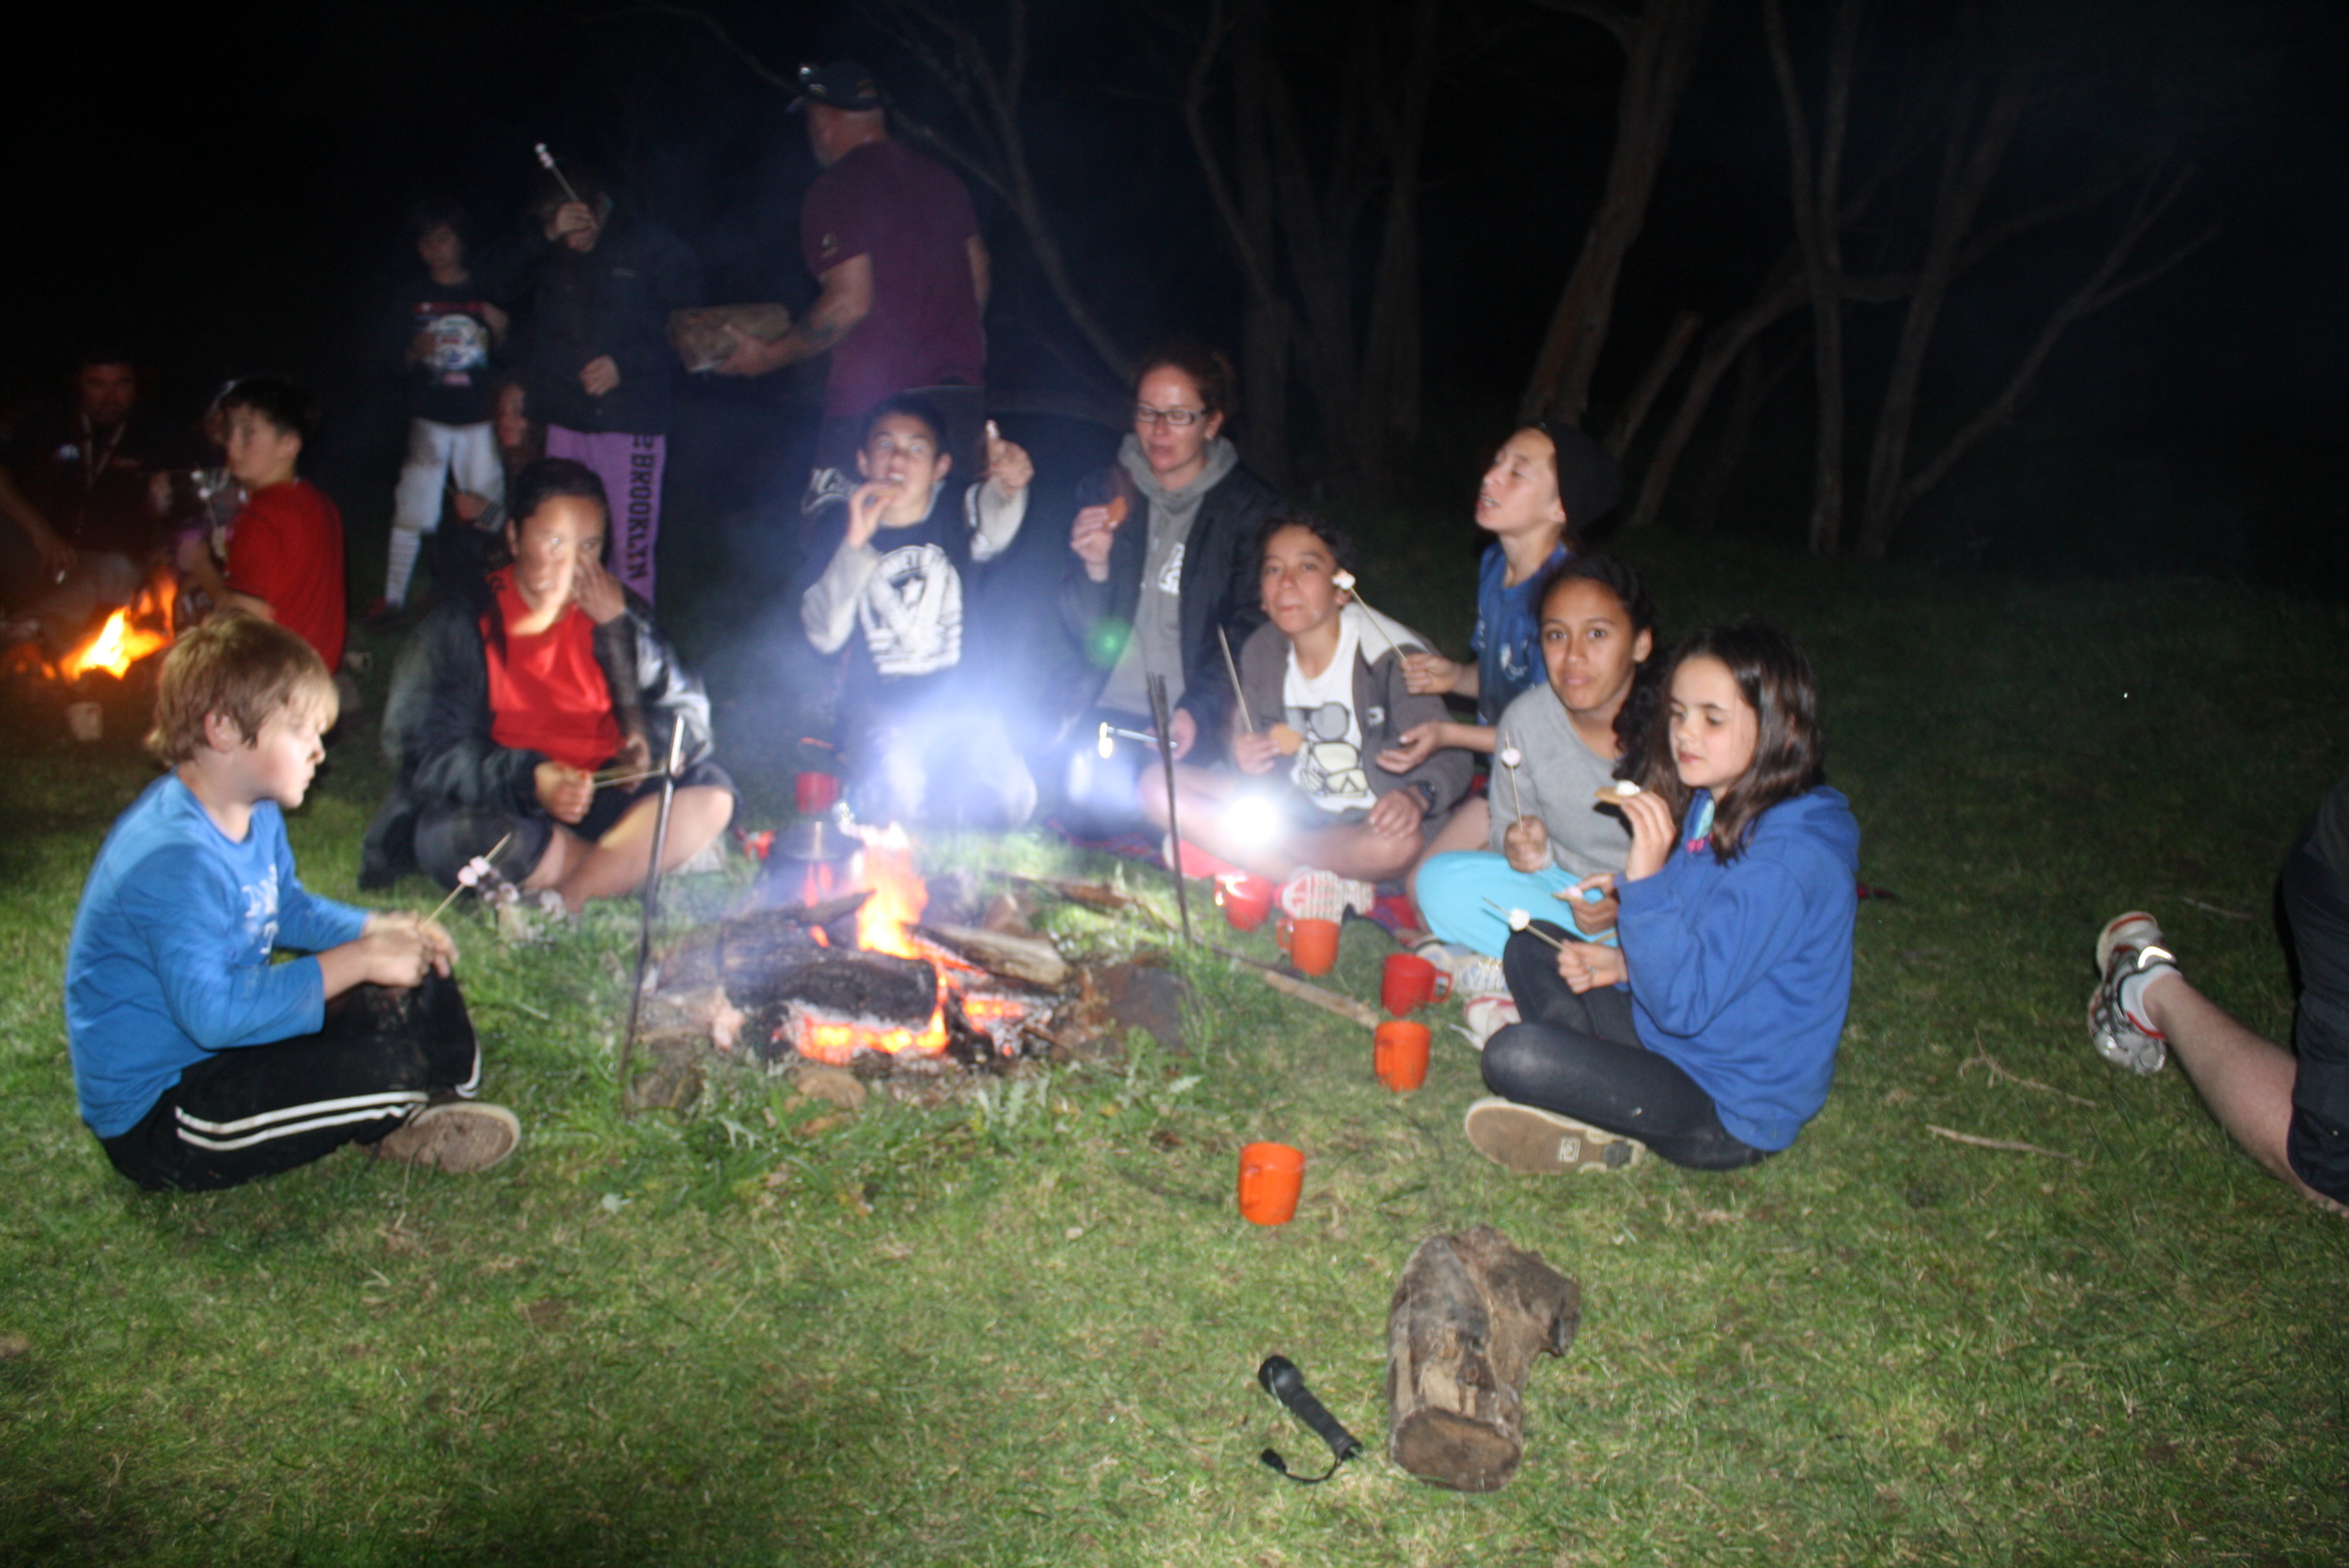   Camp fires (with permit) are a camp classic activity. Please supply your own wood. 2 port-a-loos are available for camping and&nbsp;abseiling.  